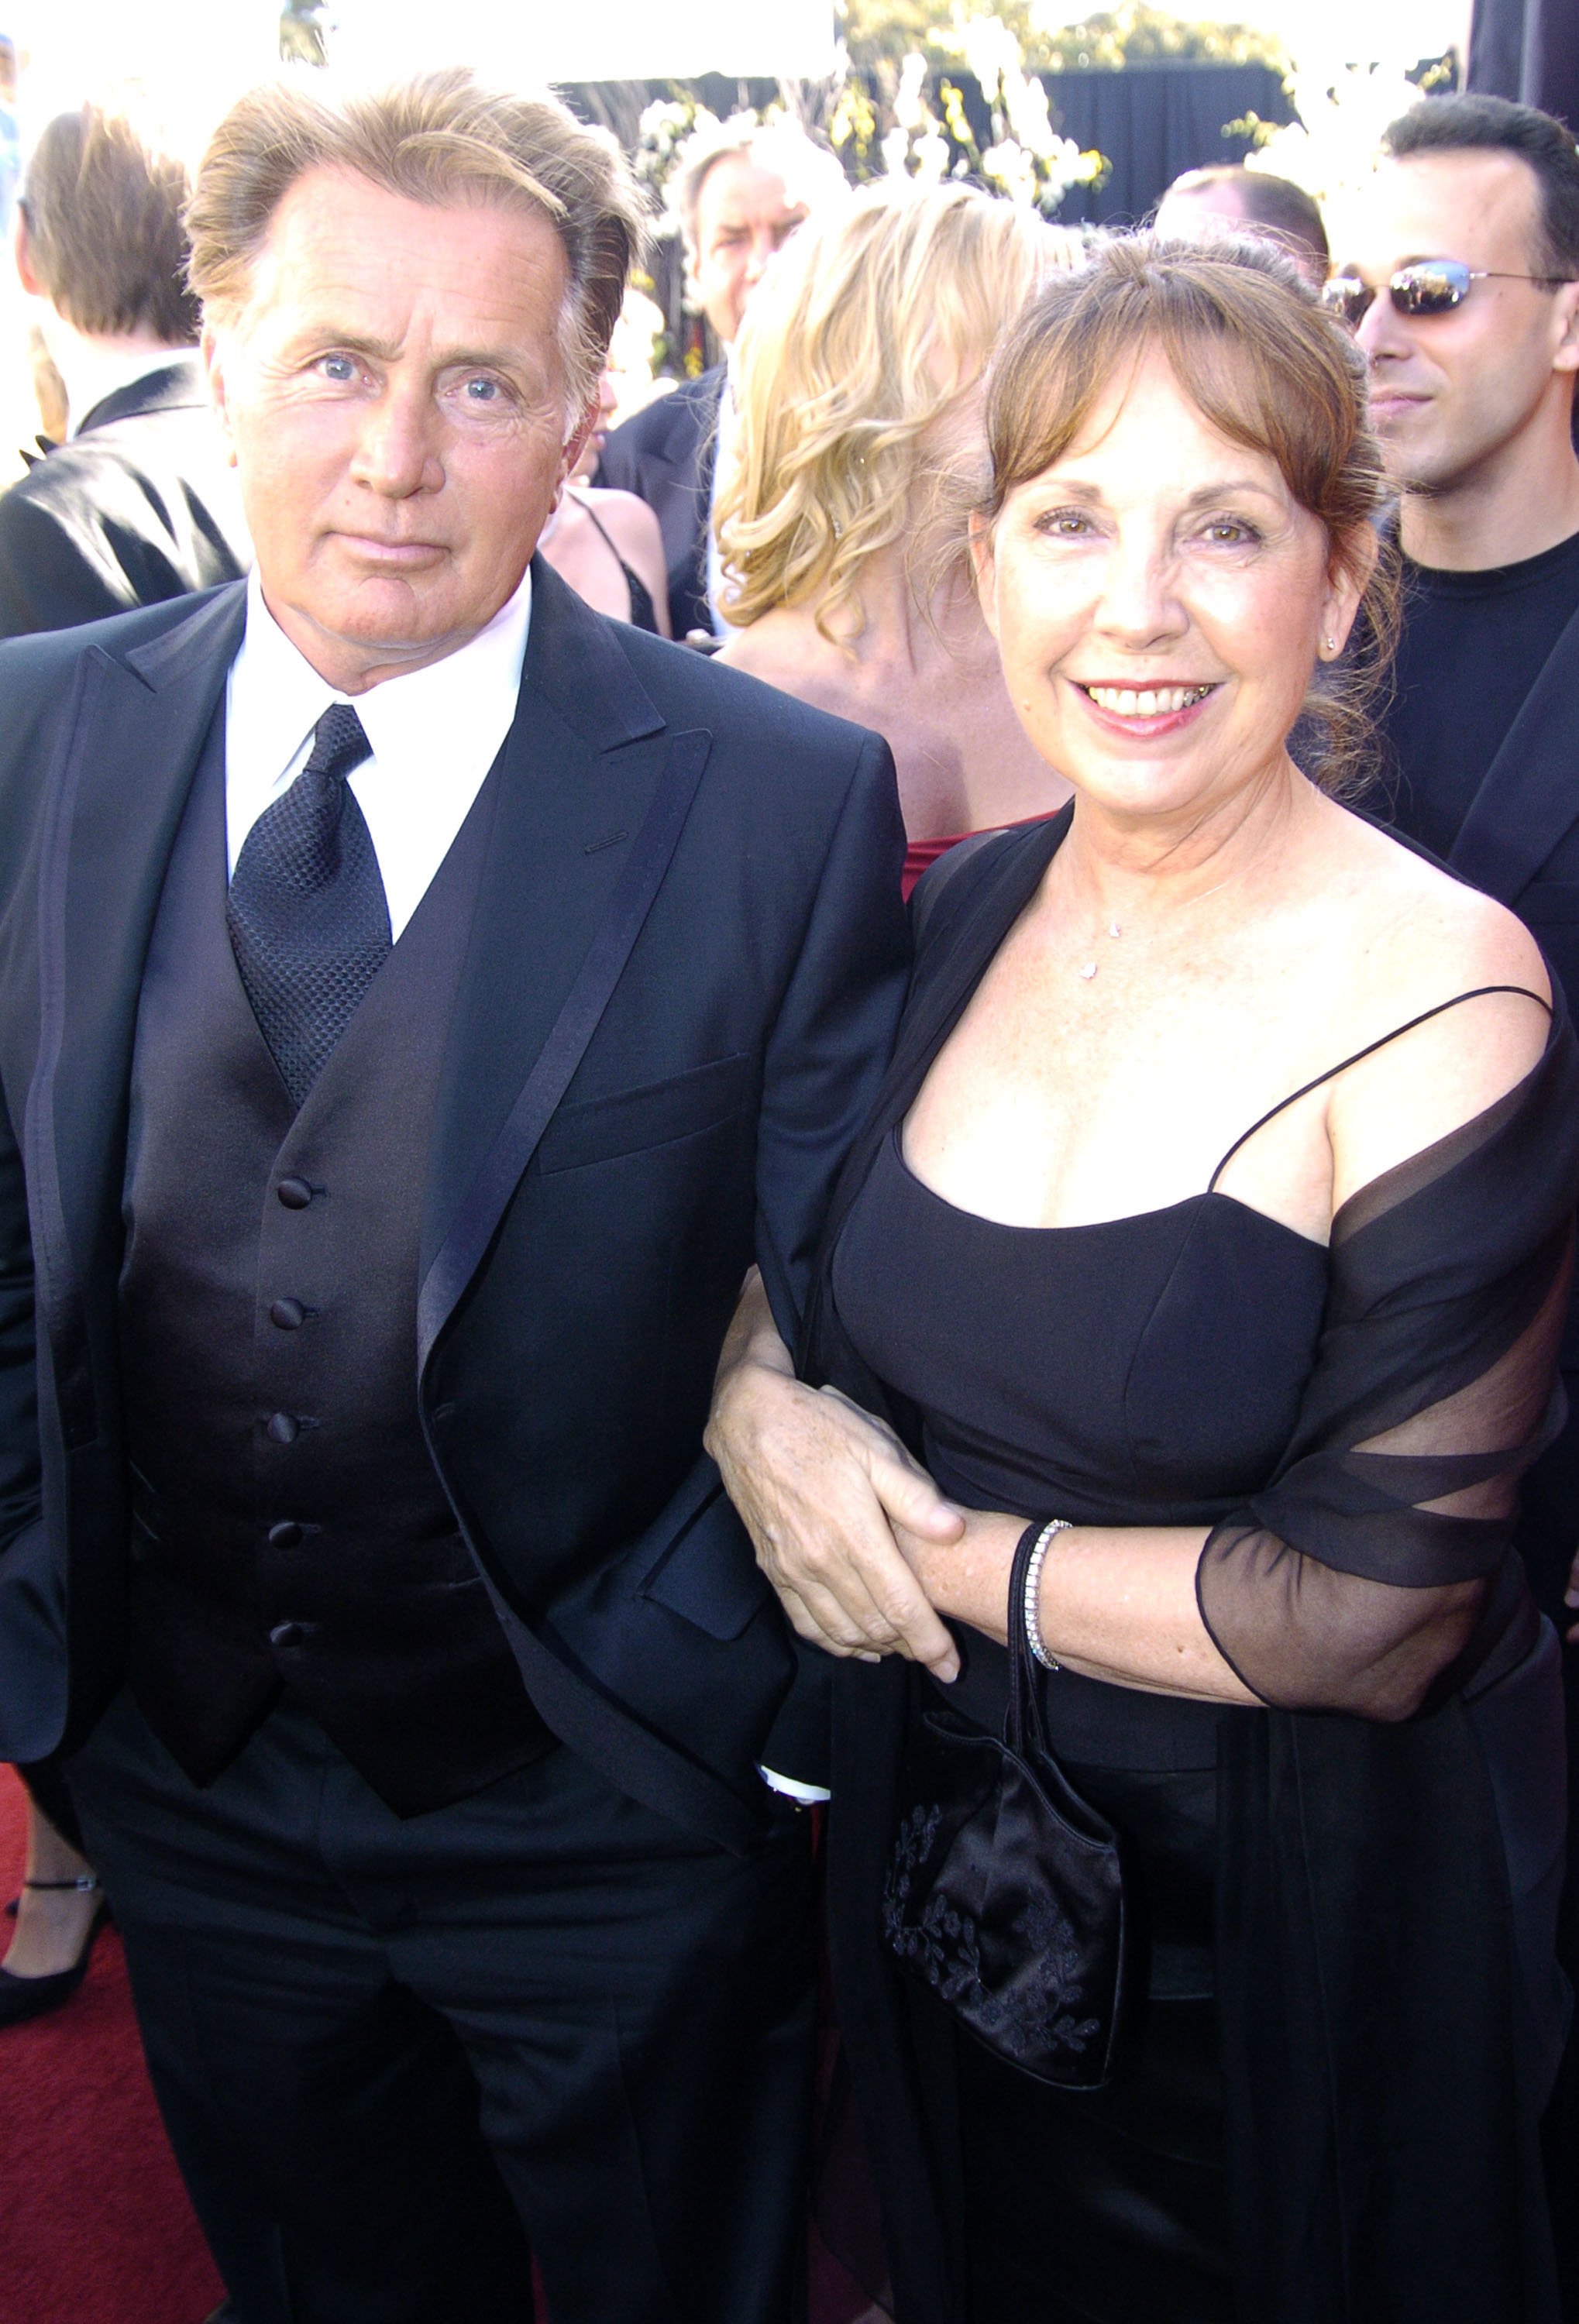 Martin Sheen and Janet Sheen during The 56th Annual Primetime Emmy Awards - Red Carpet at The Shrine Auditorium in Los Angeles, California. / Source: Getty Images